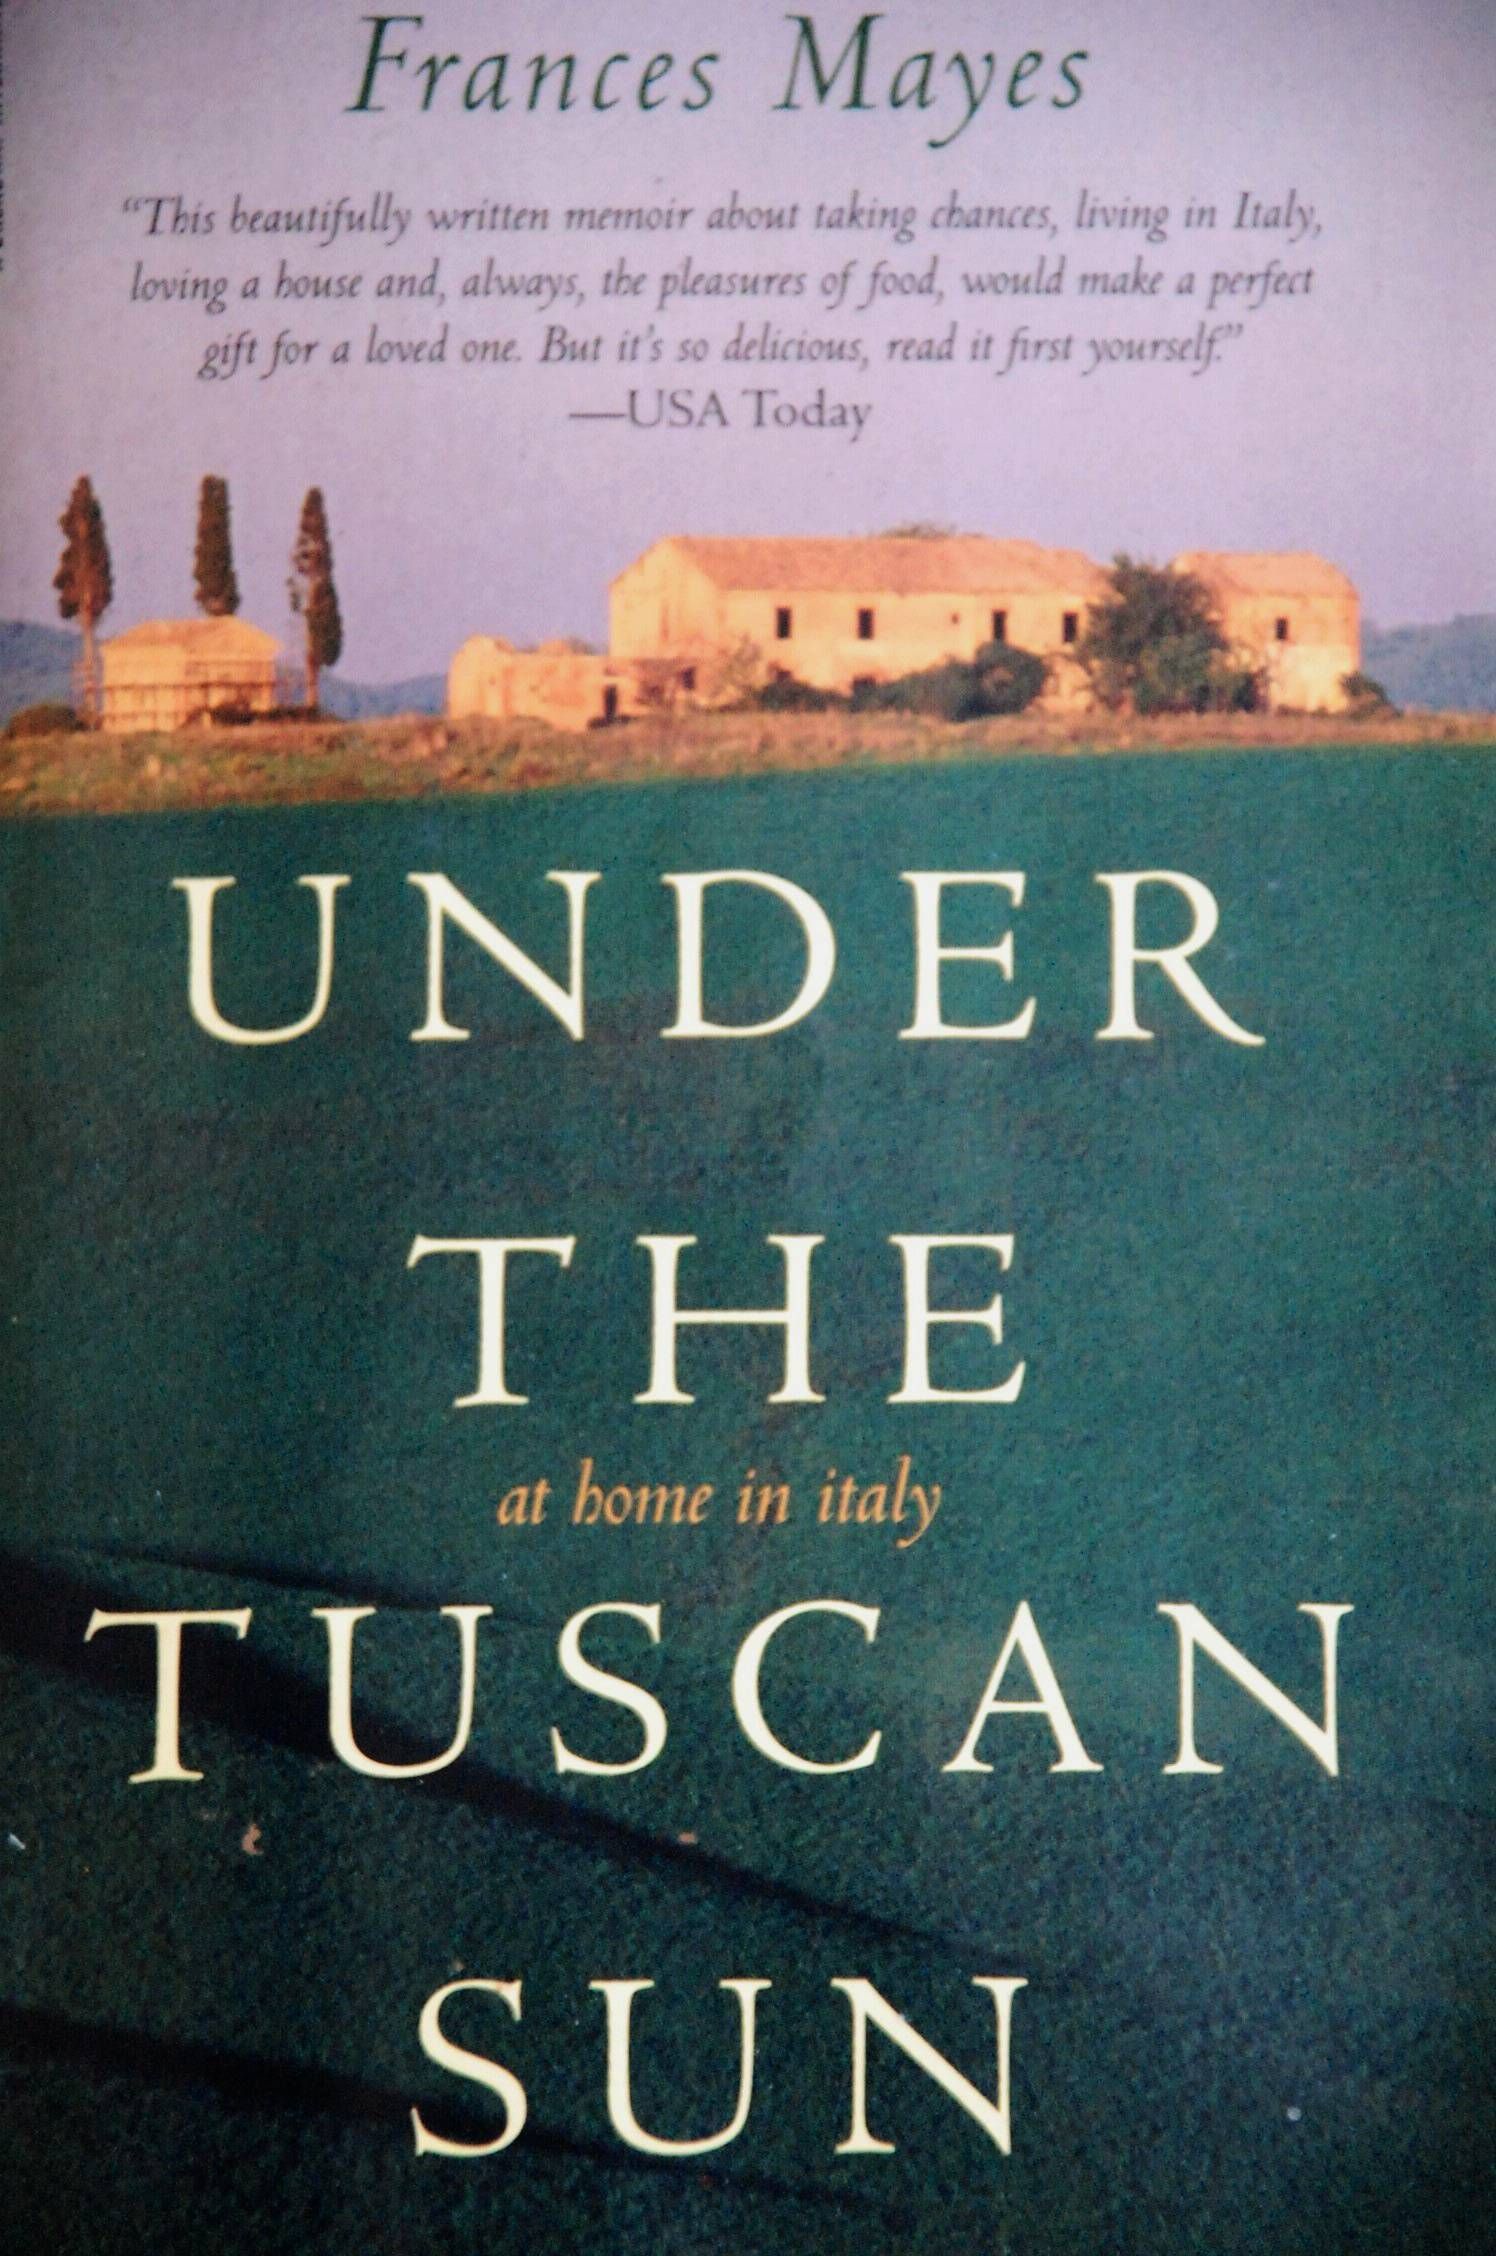 book cover - Under the Tuscan Sun by Frances Mayes